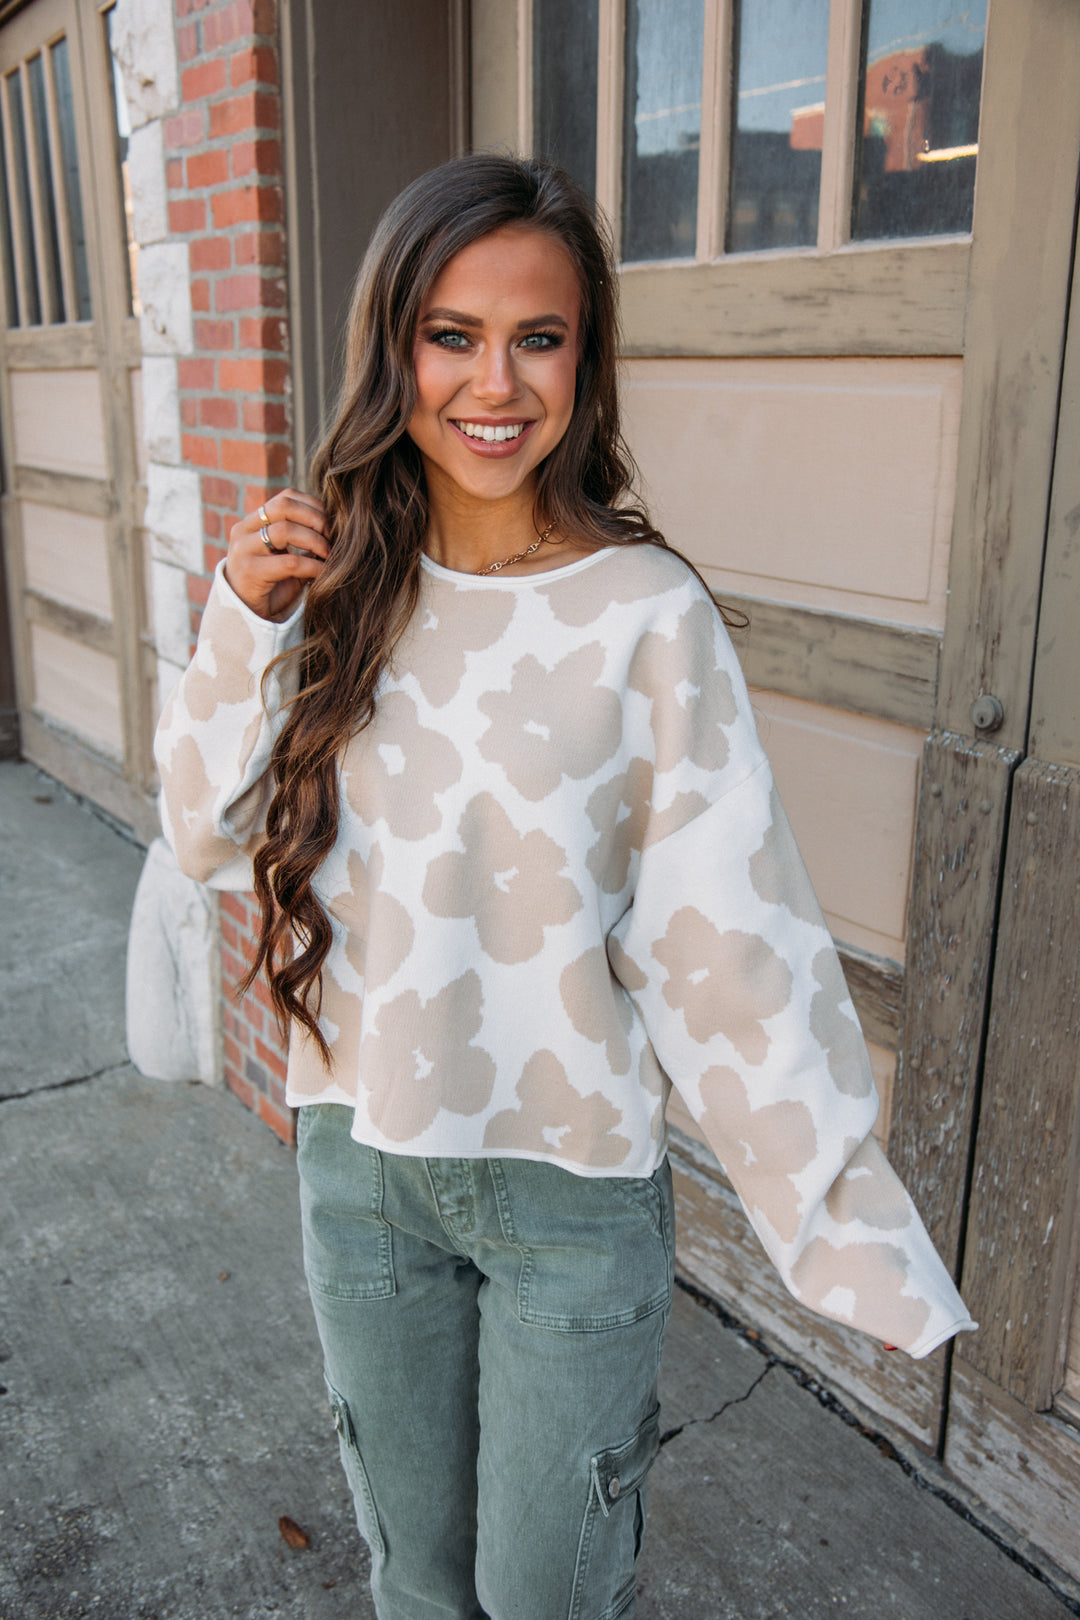 Eyes On You Flower Sweater - Cream/Taupe